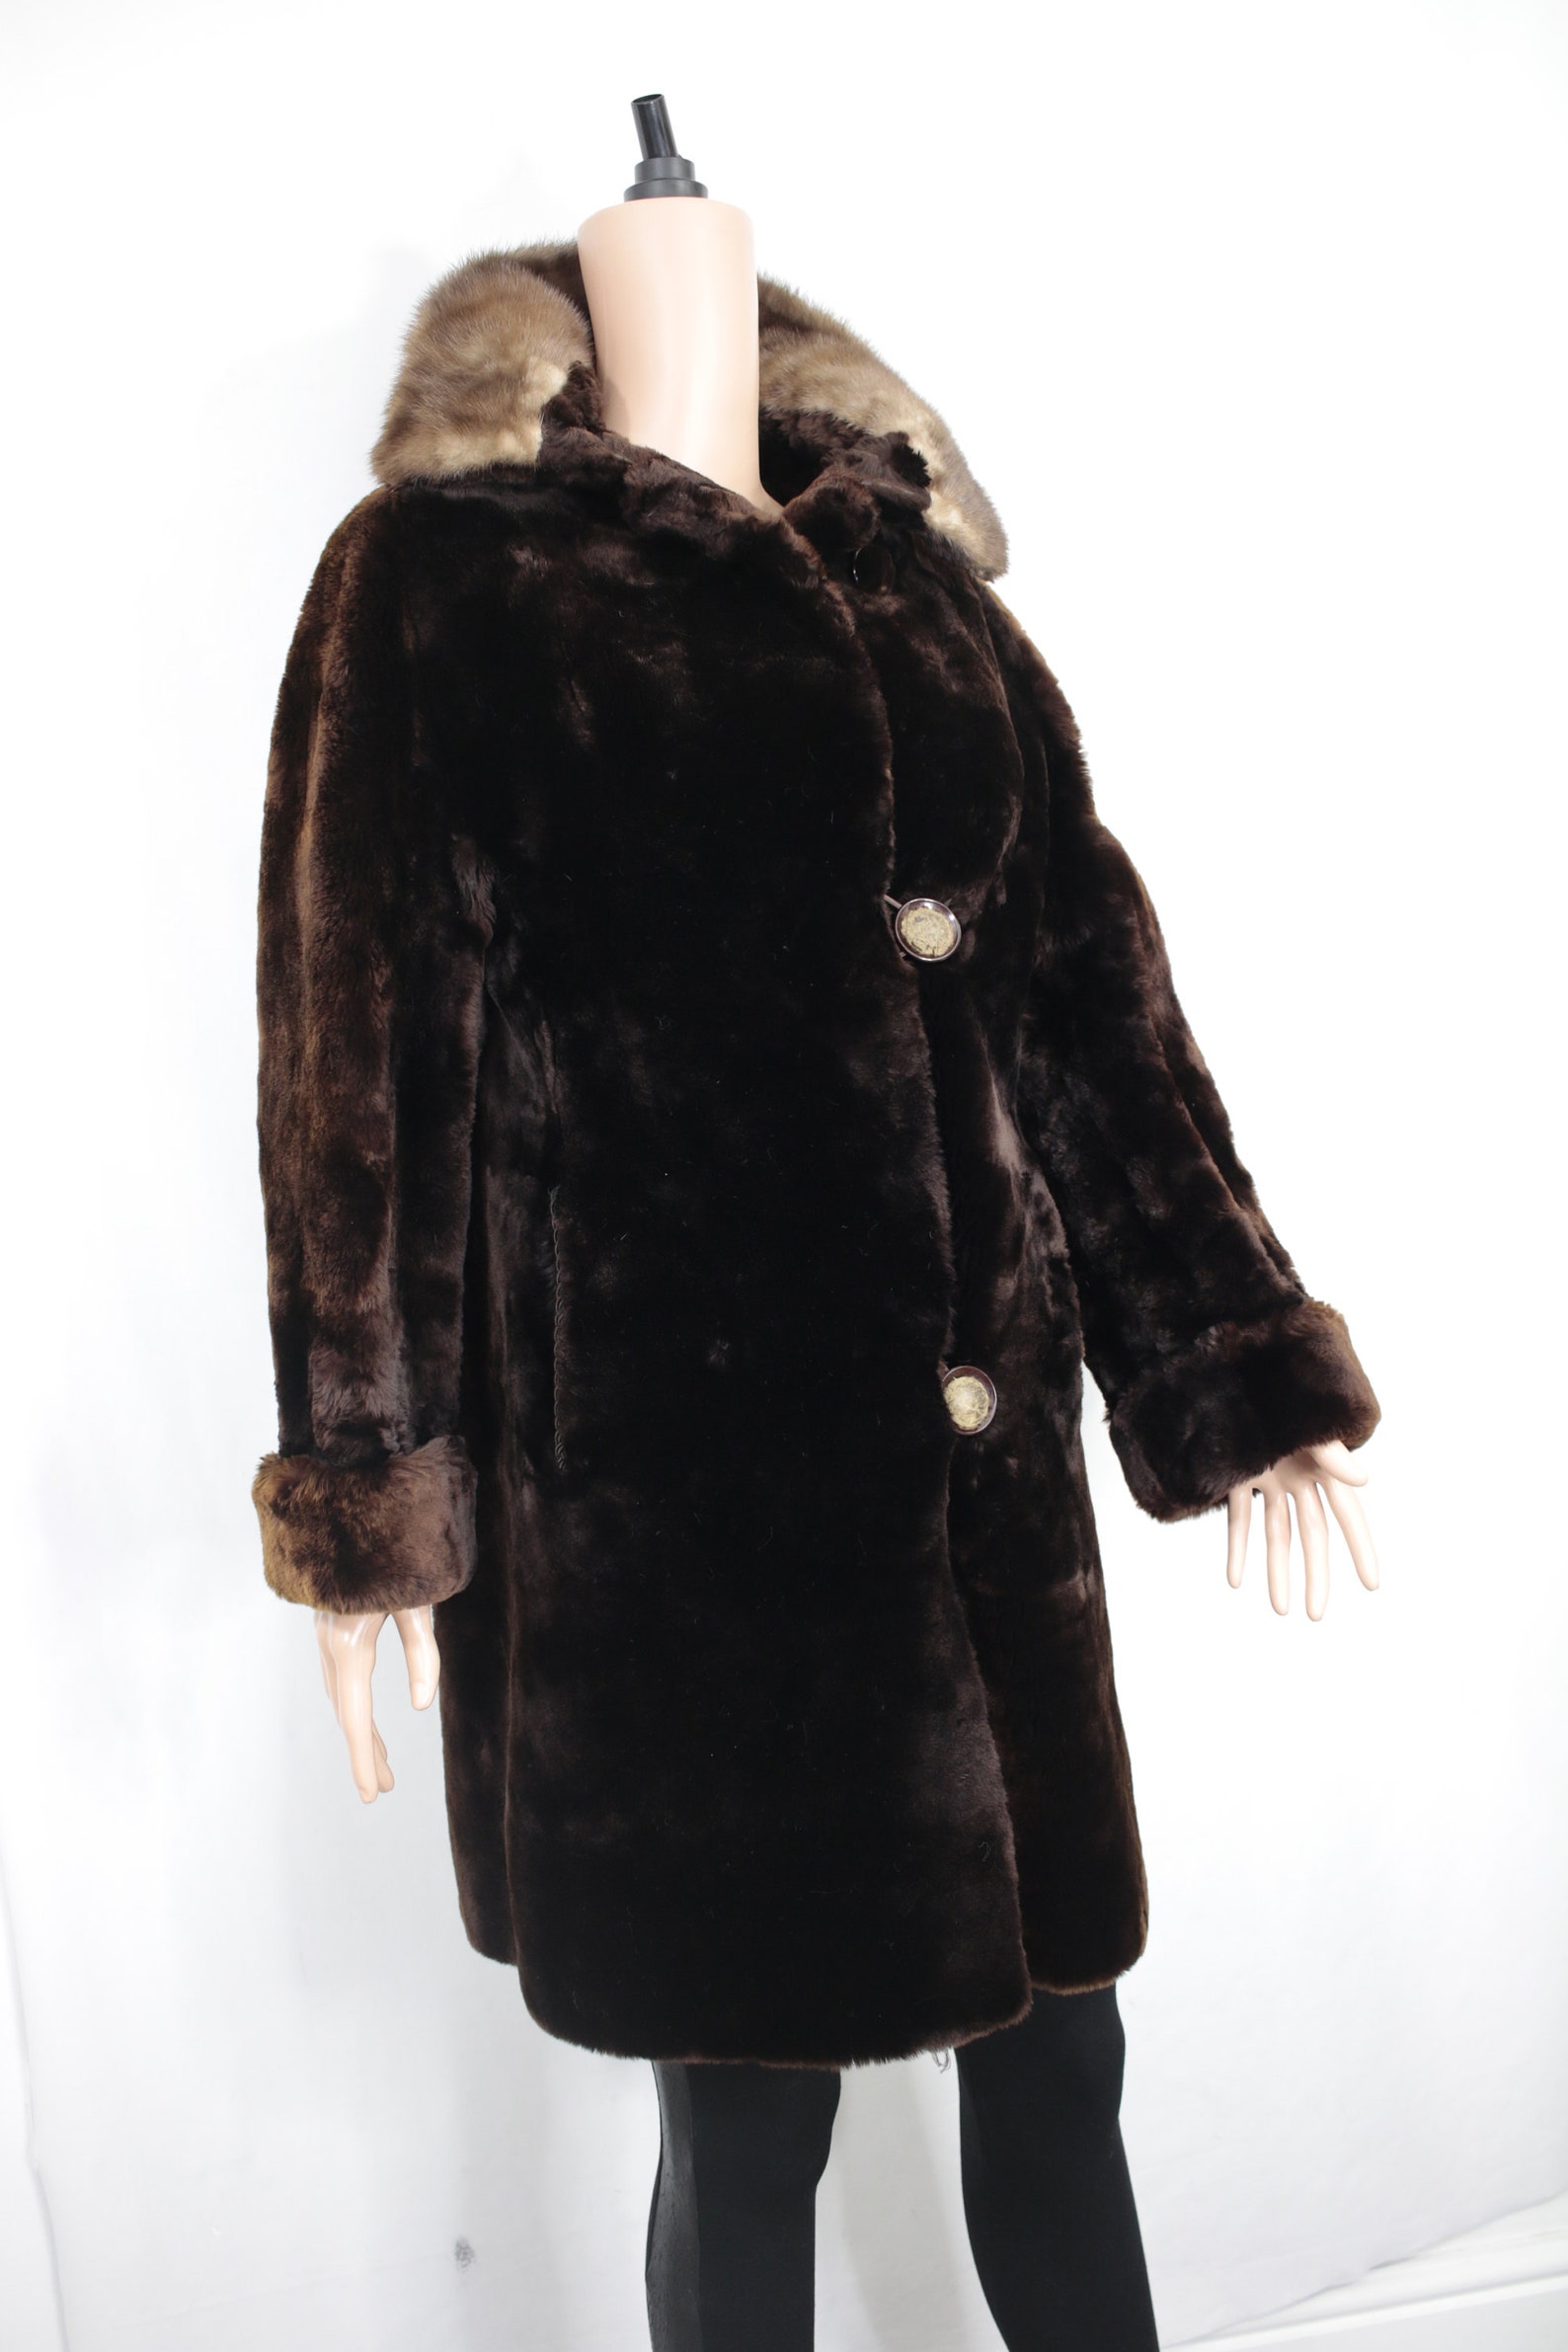 1950s-1960s mouton fur coat with mink fur collar Real | Etsy